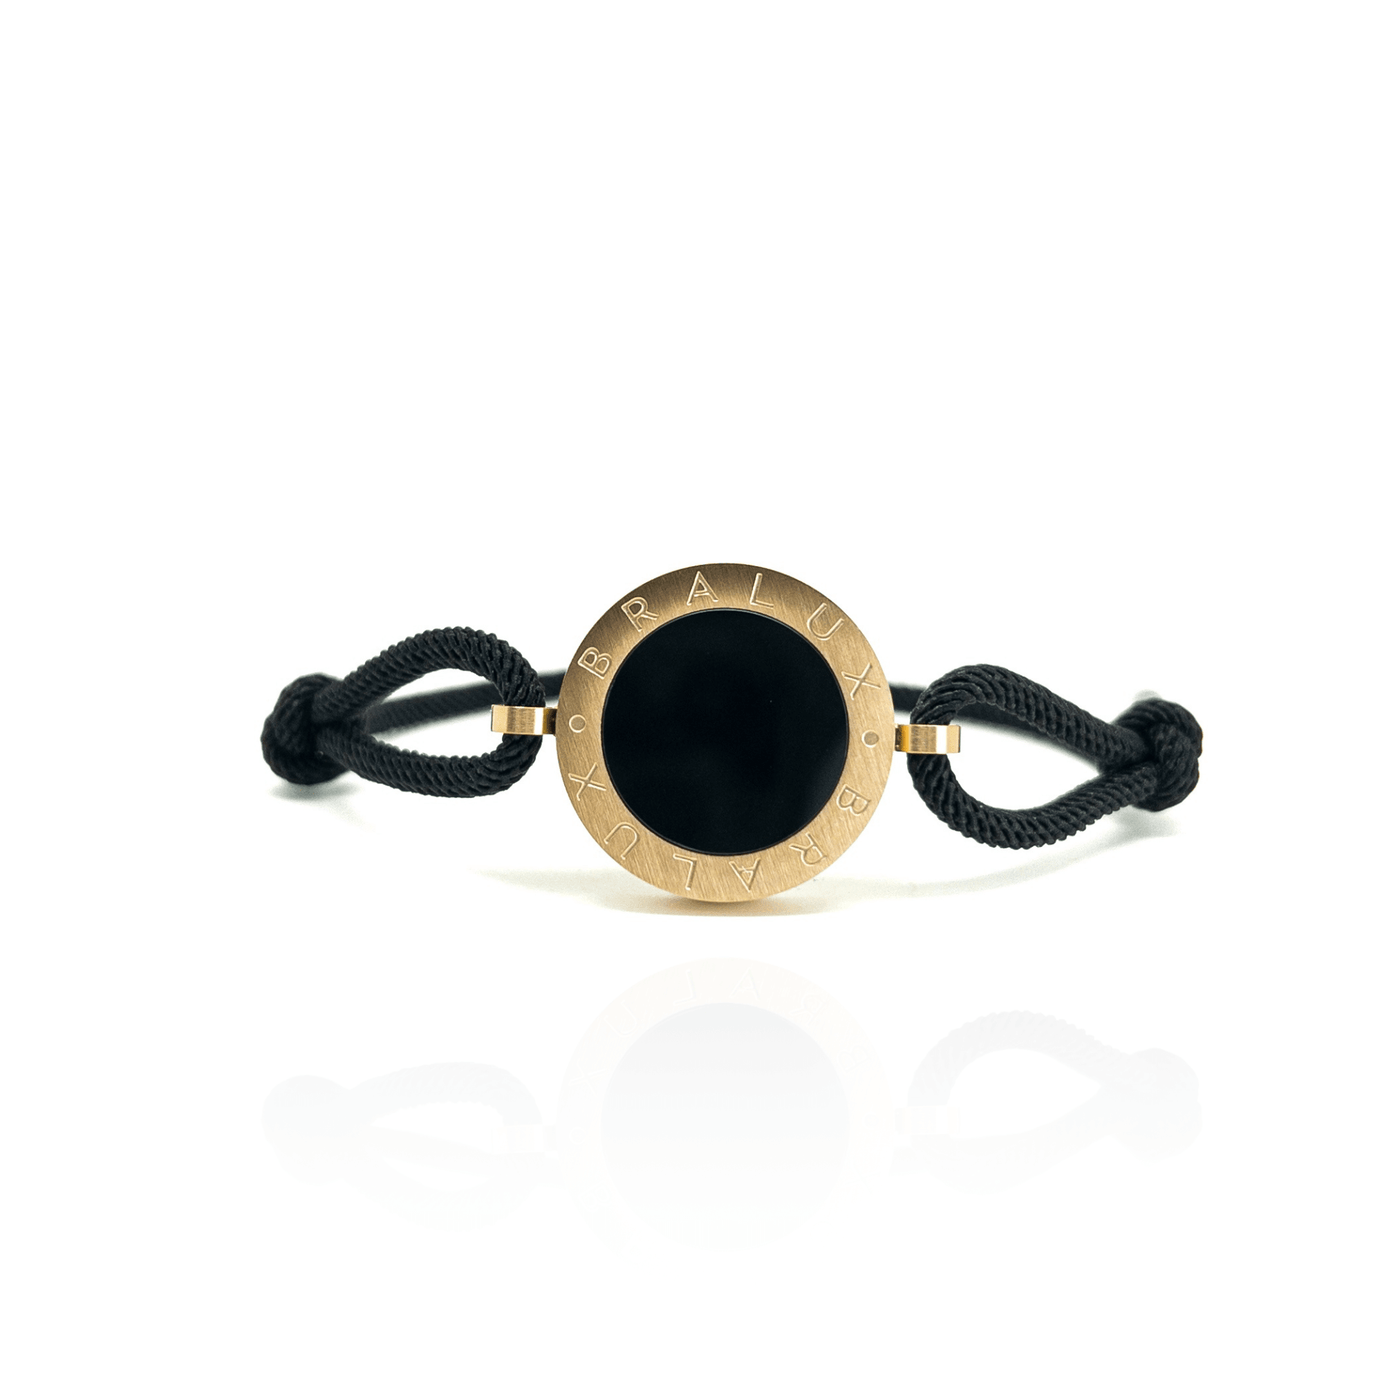 The Gold Plated Circle Onyx Stone